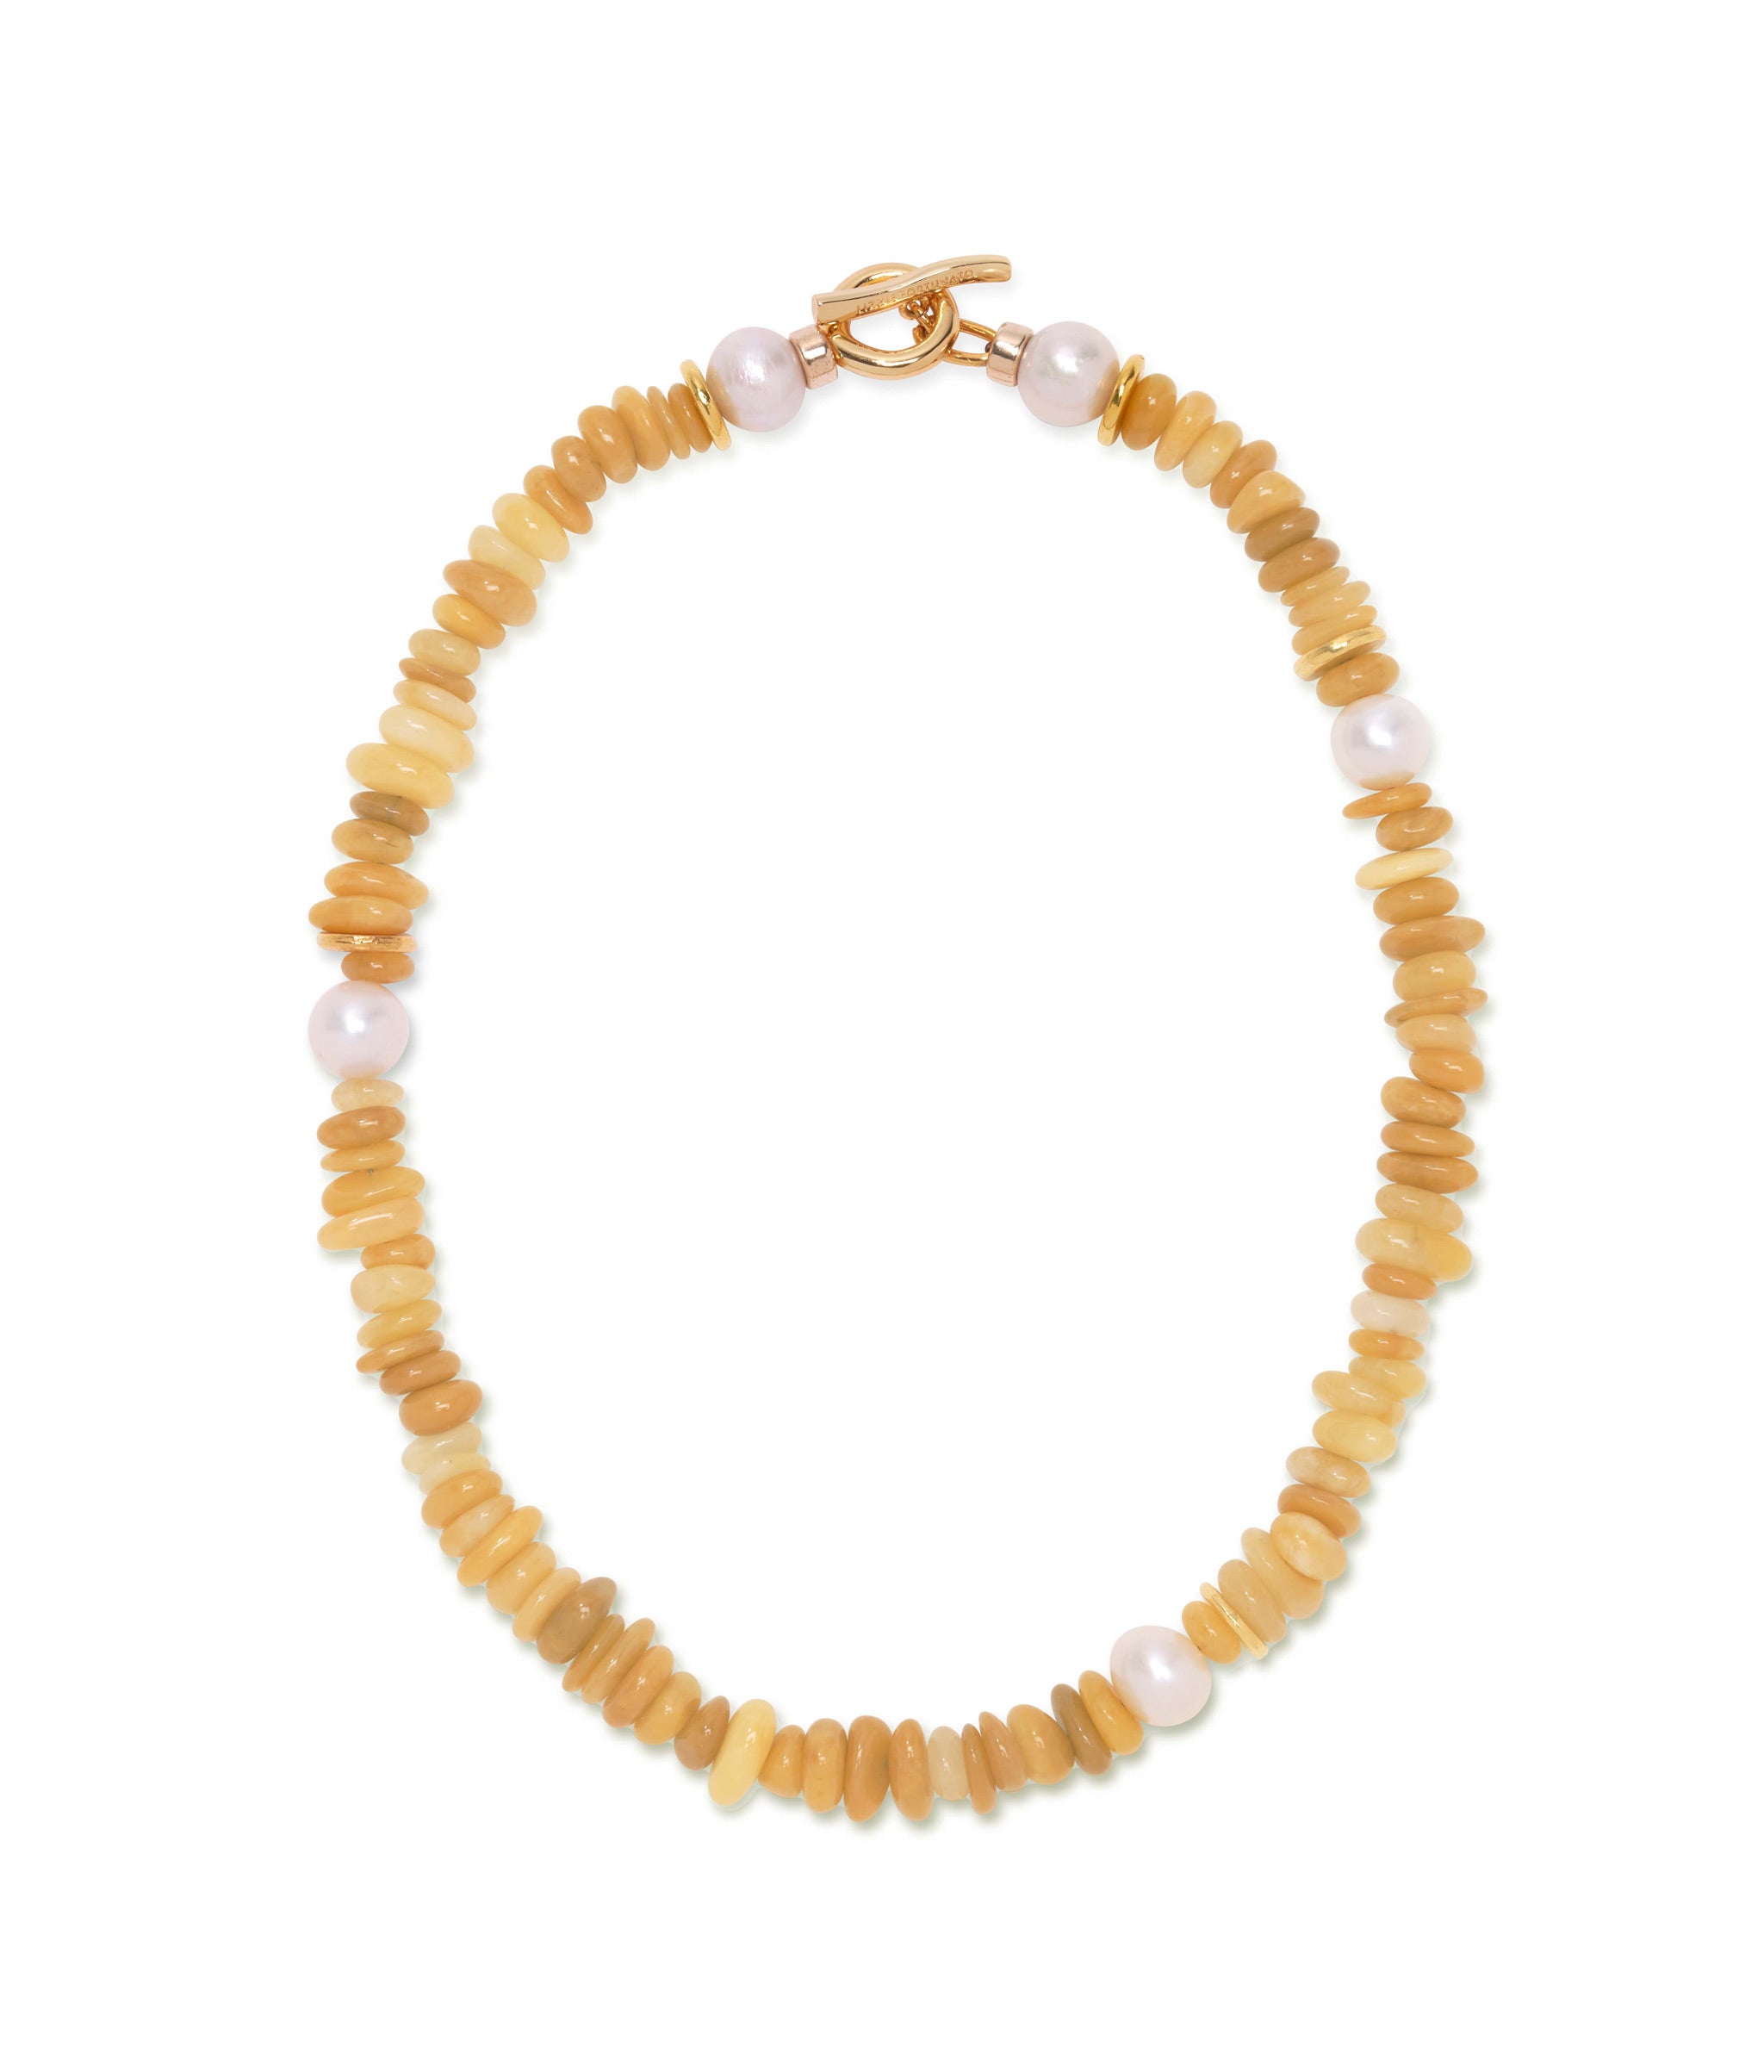 Mood Necklace in Yellow Jade. Yellow jade necklace with assorted pearls and gold plated brass with toggle closure. 